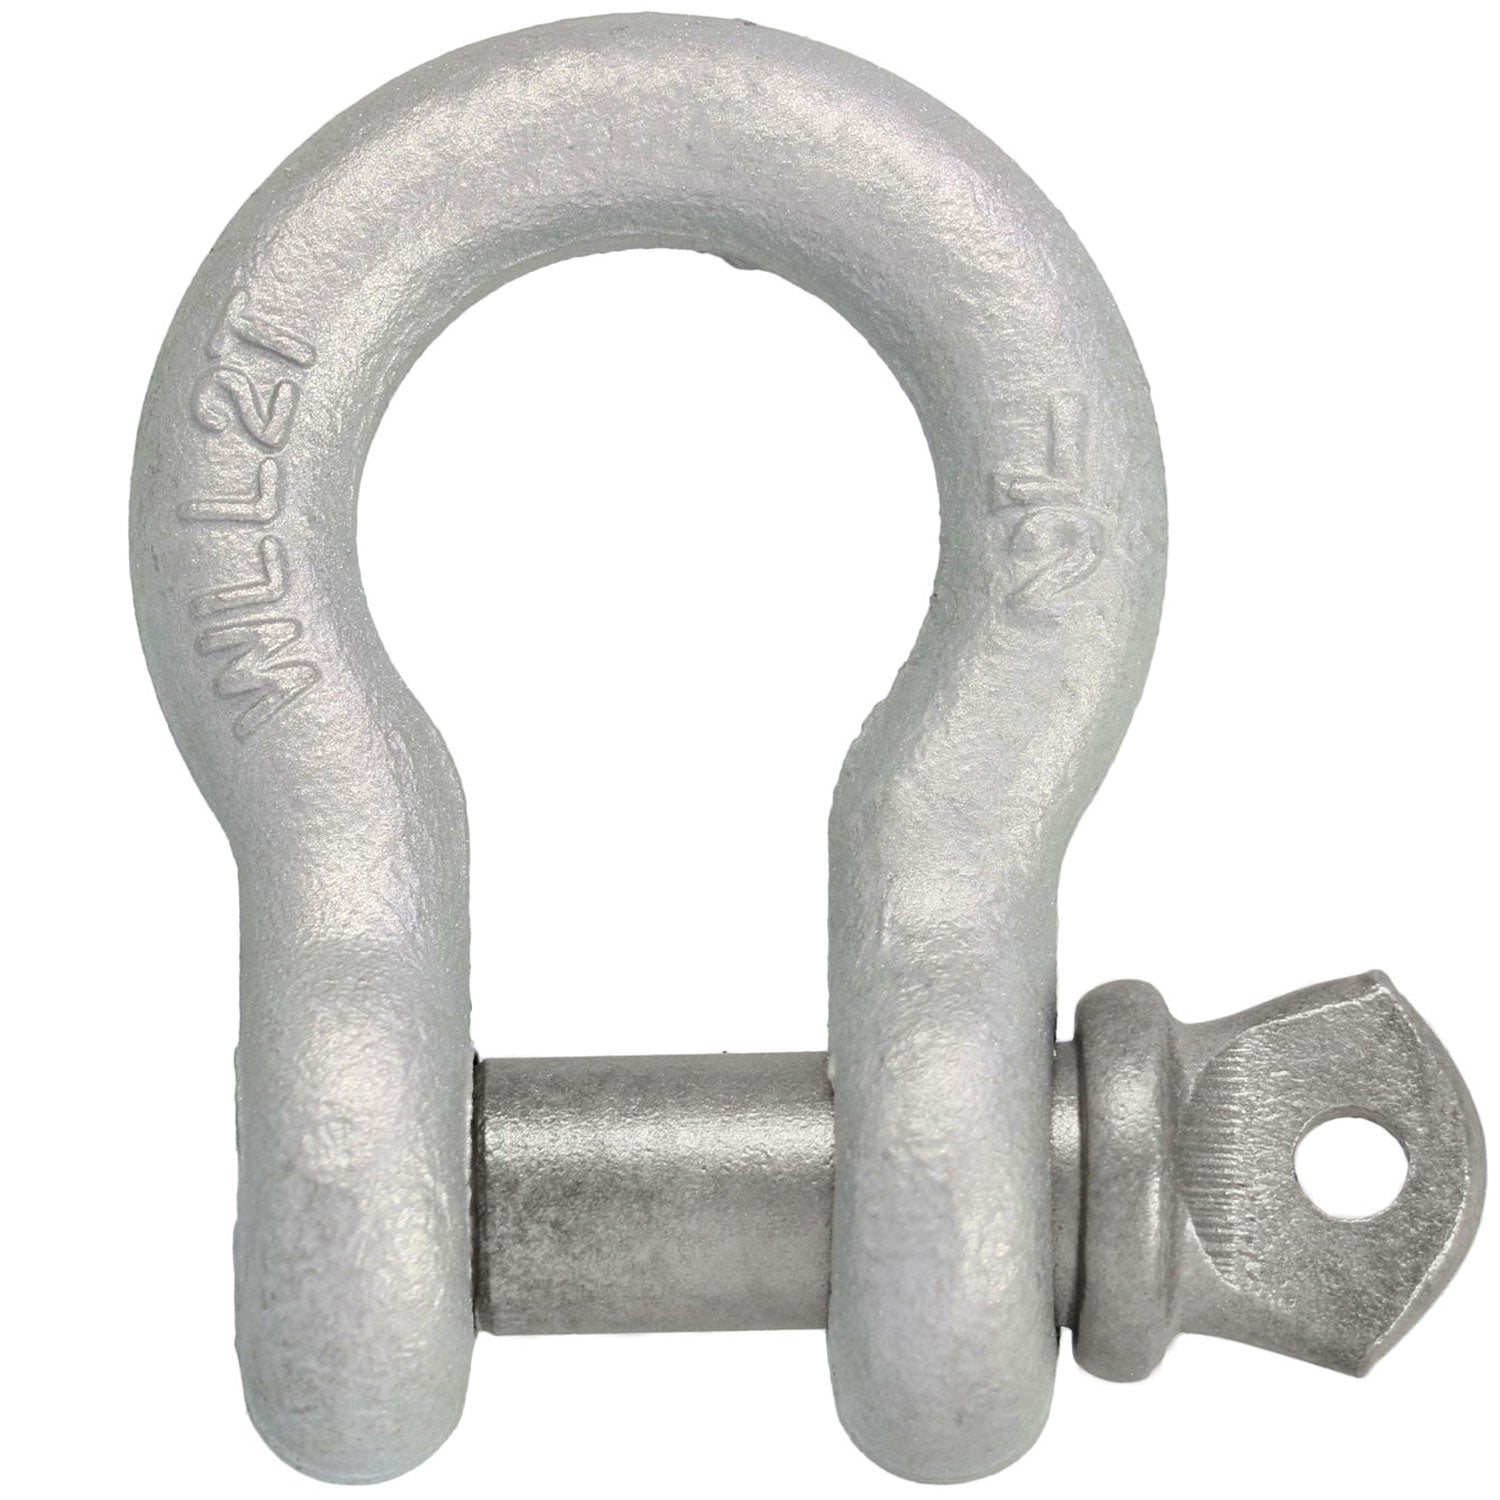 1/2 in., 2 ton, Galvanized Screw Pin Anchor Shackle